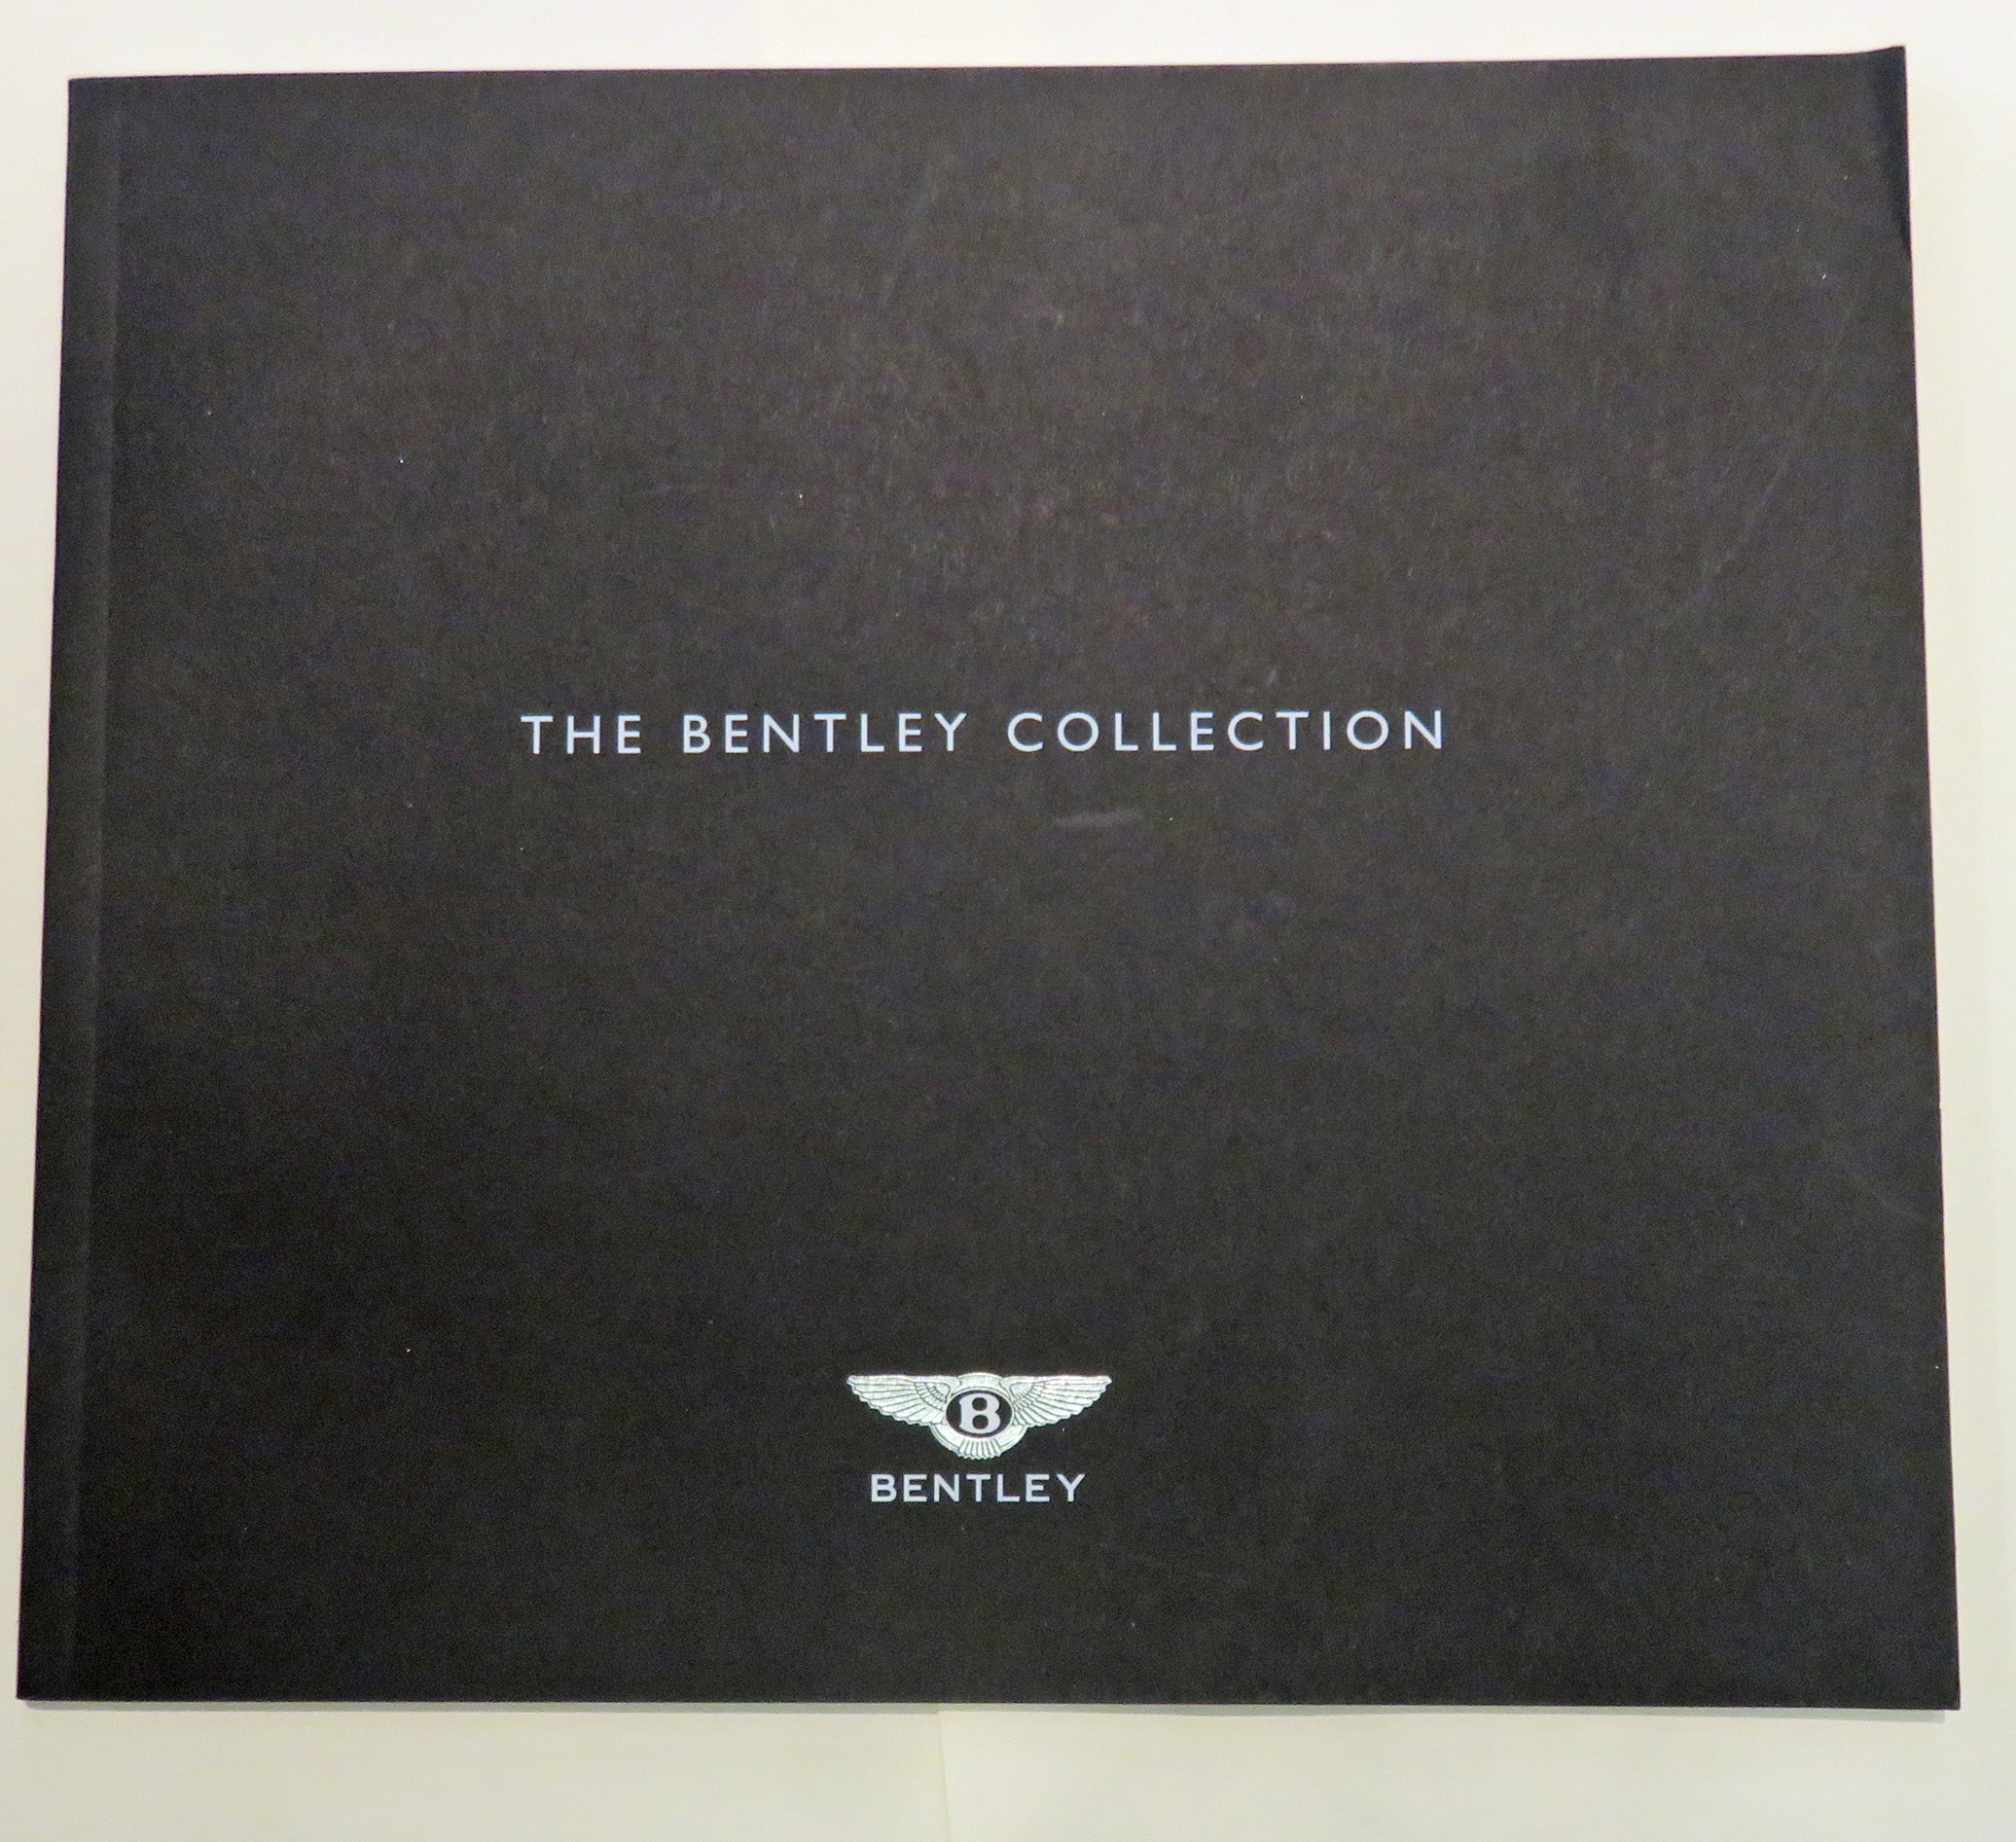 The Bentley Collection